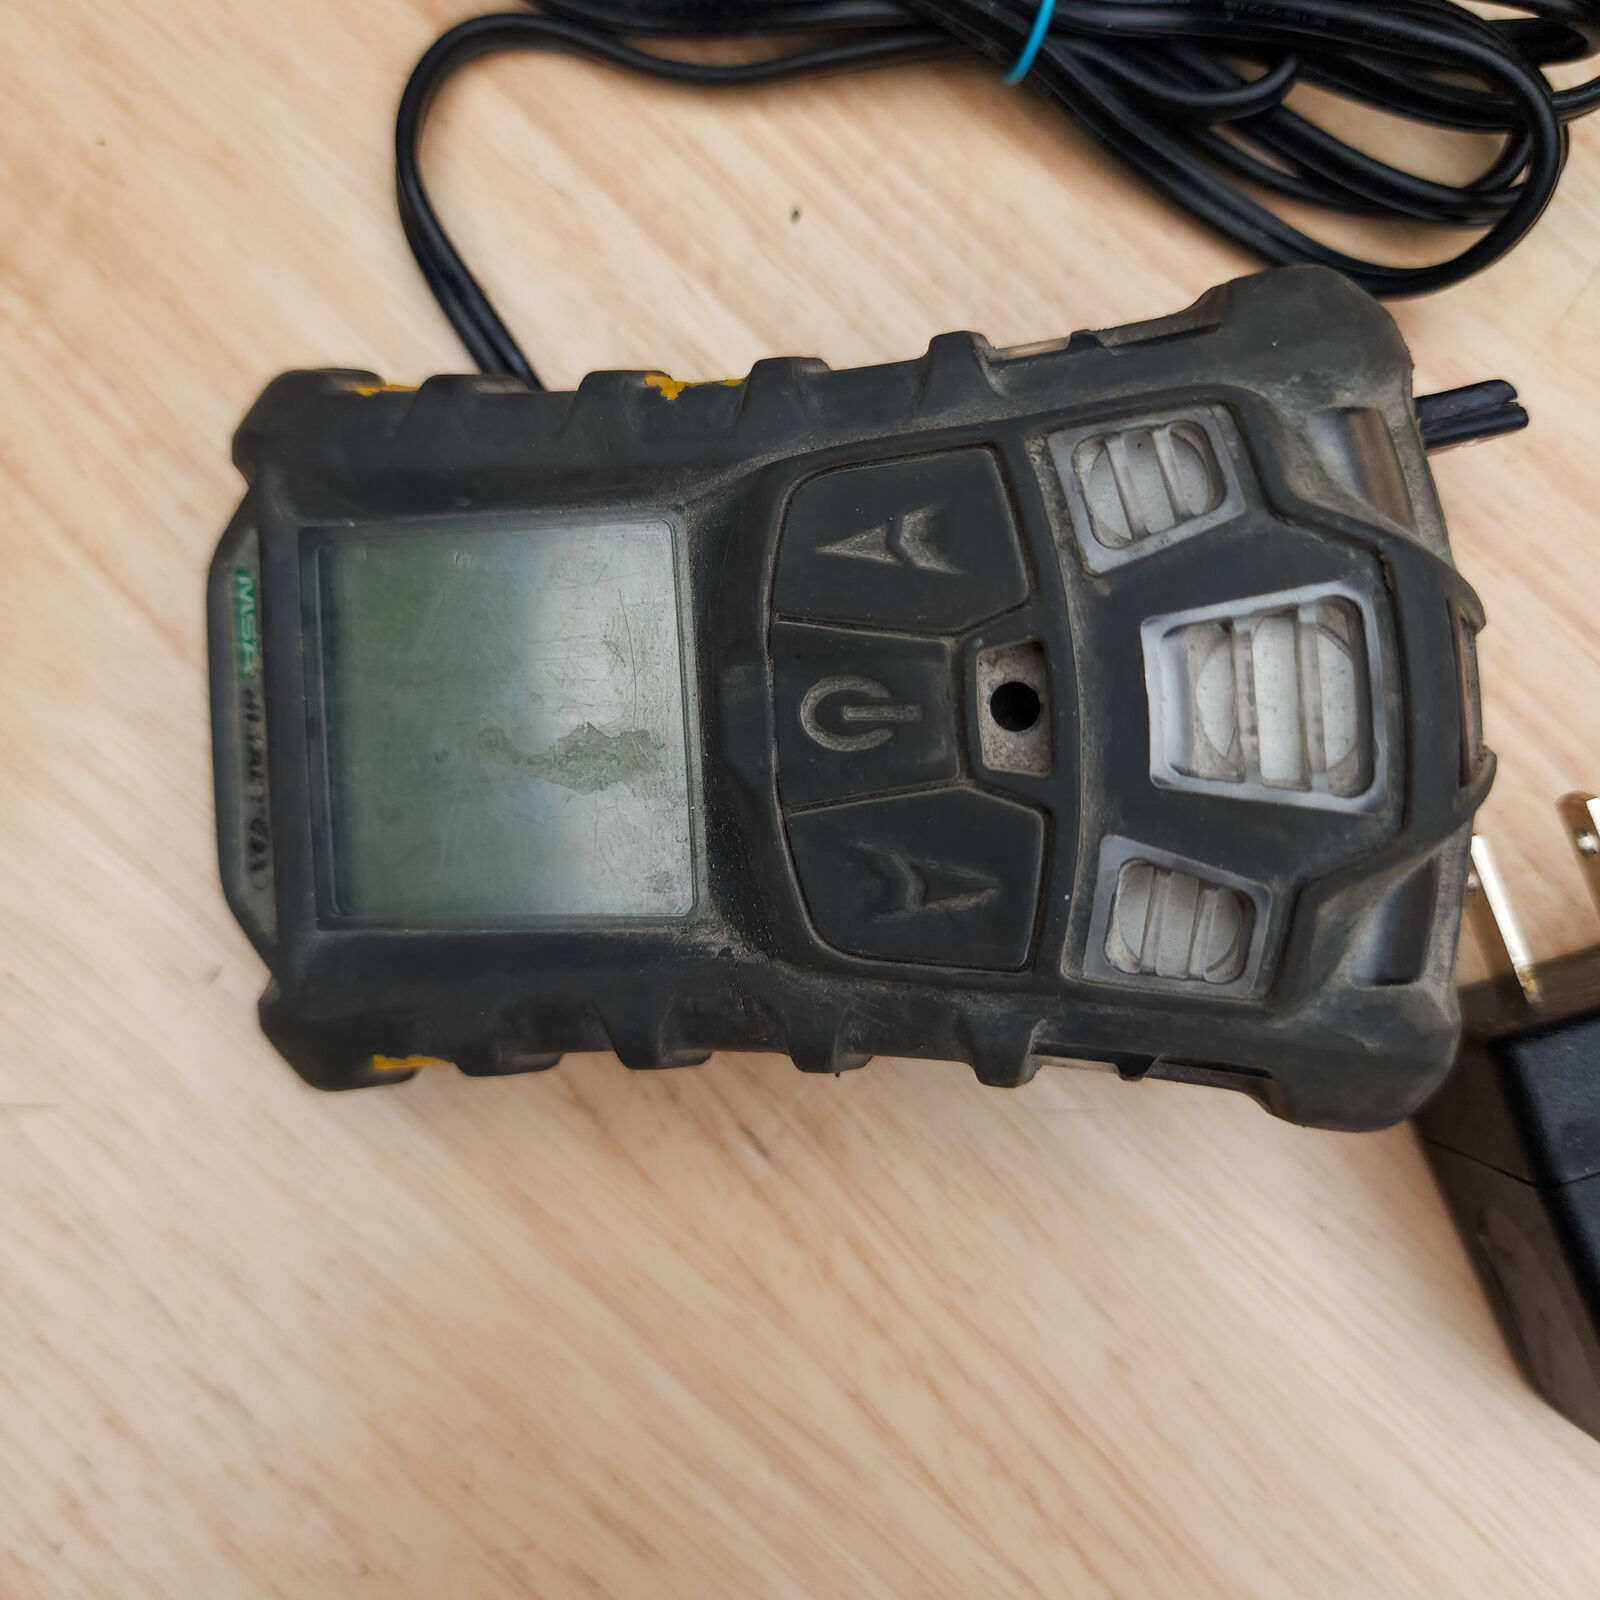 MSA Altair 4X Multi Gas Detector in Charcoal/Black - Requires Calibration